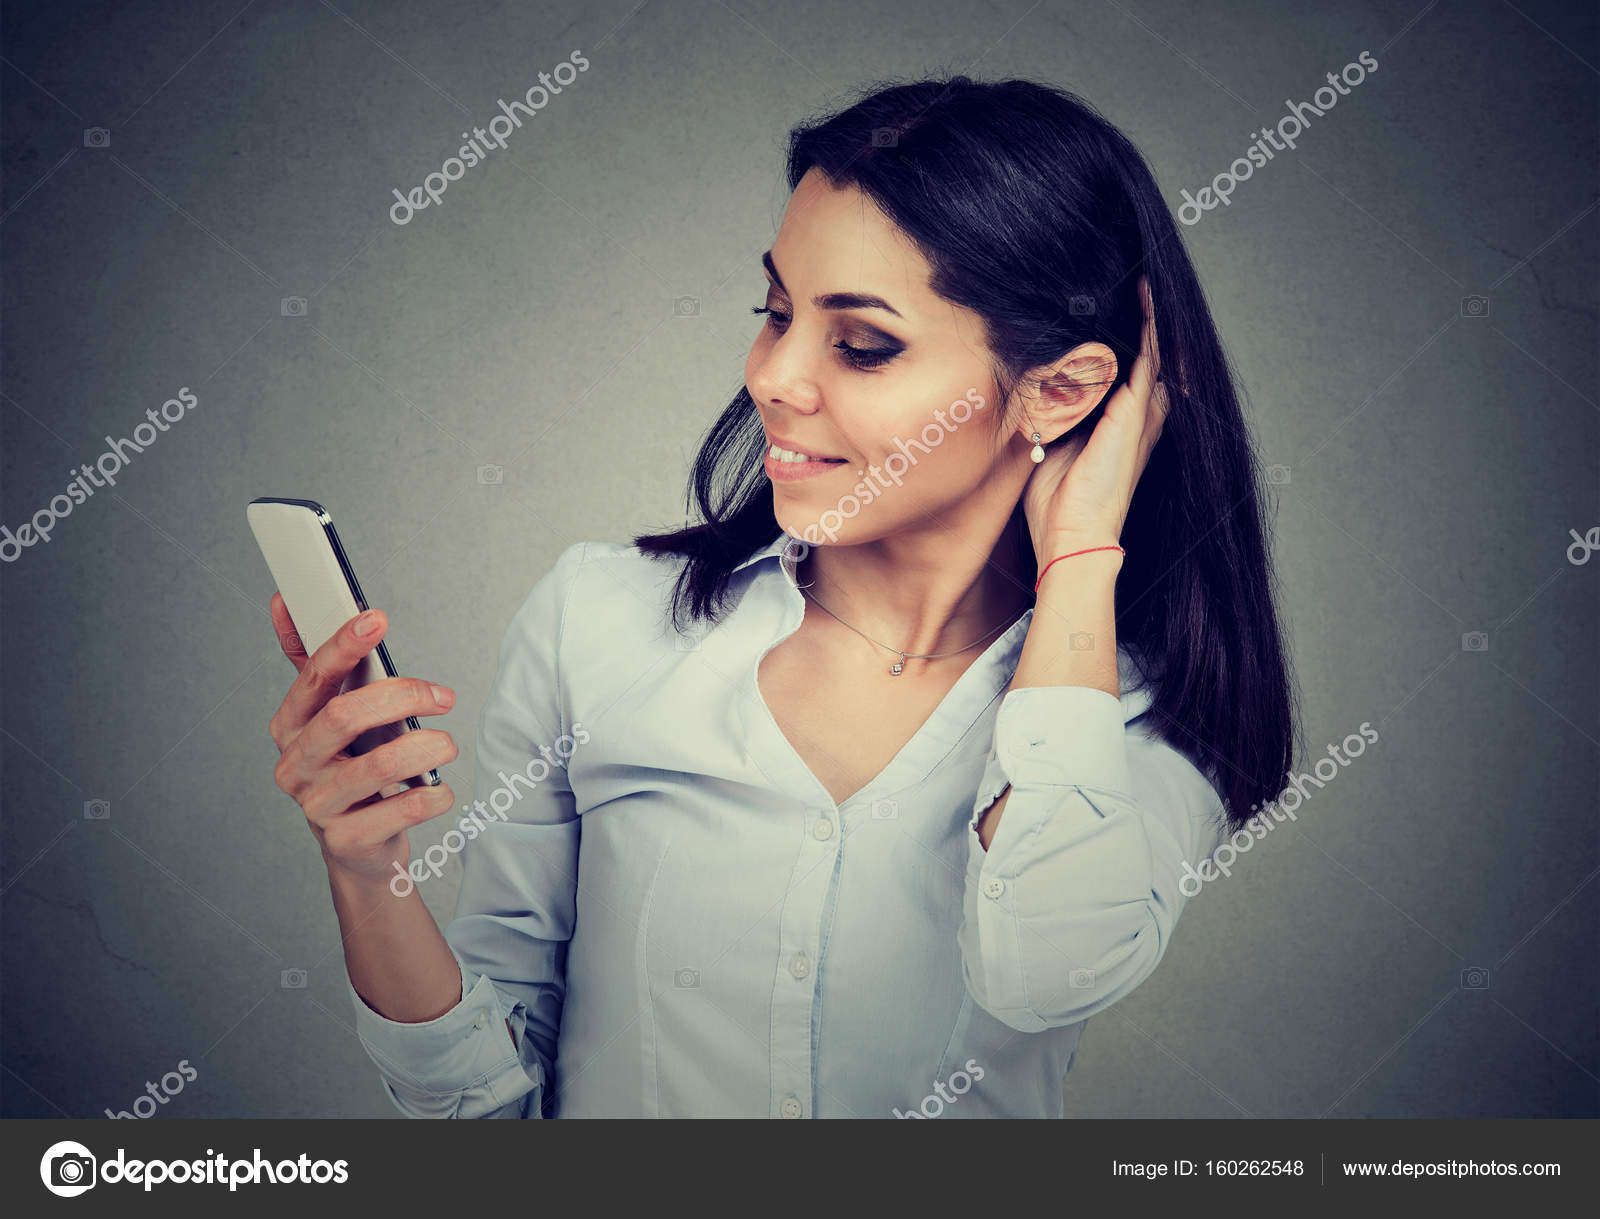 Woman reading text message on smart phone having a pleasant ...